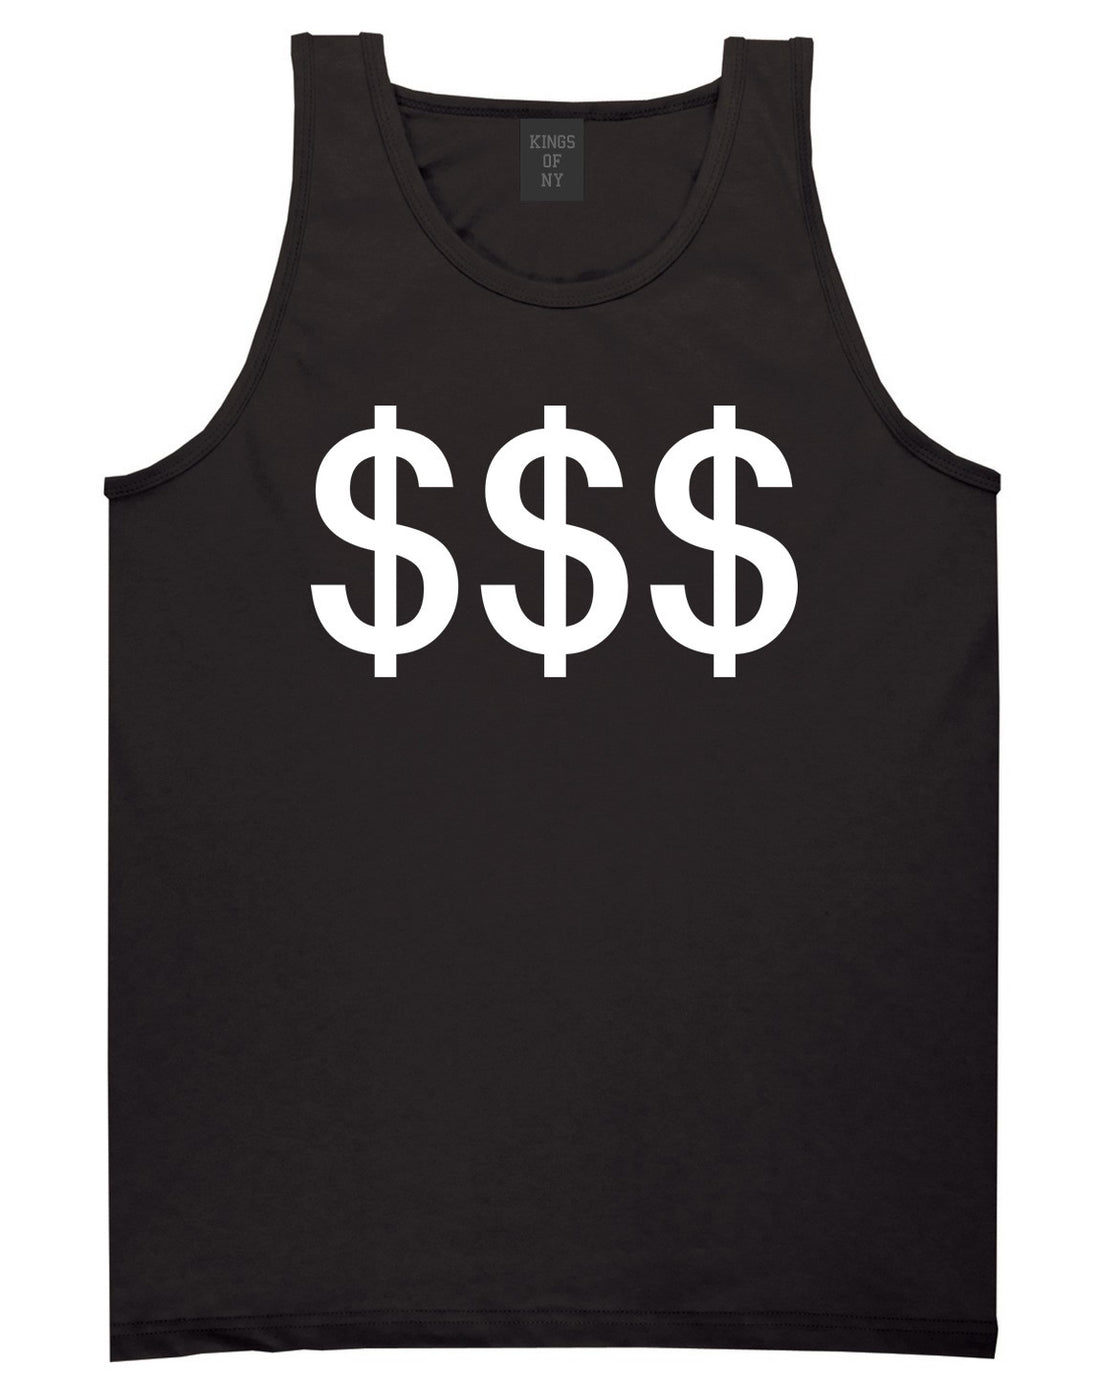 Kings Of NY Money Signs Tank Top in Black